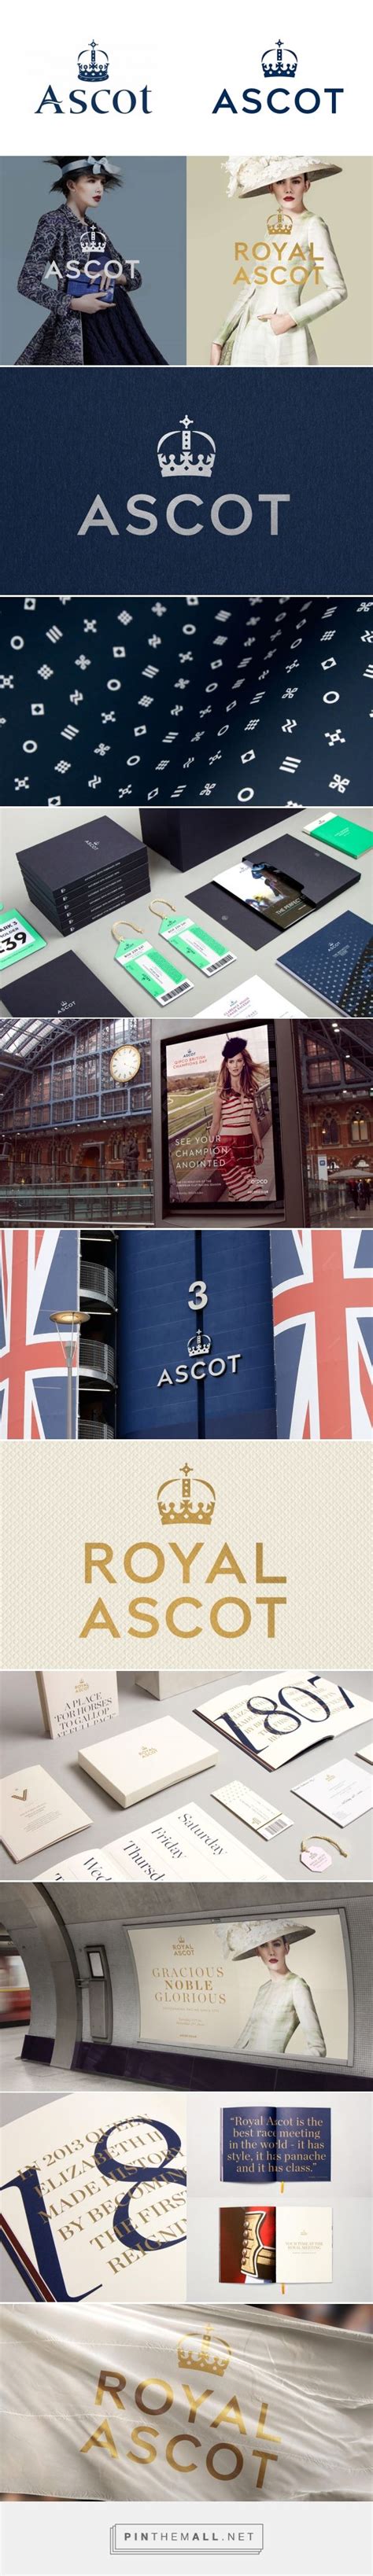 Brand New New Logo And Identity For Ascot By The Clearing A